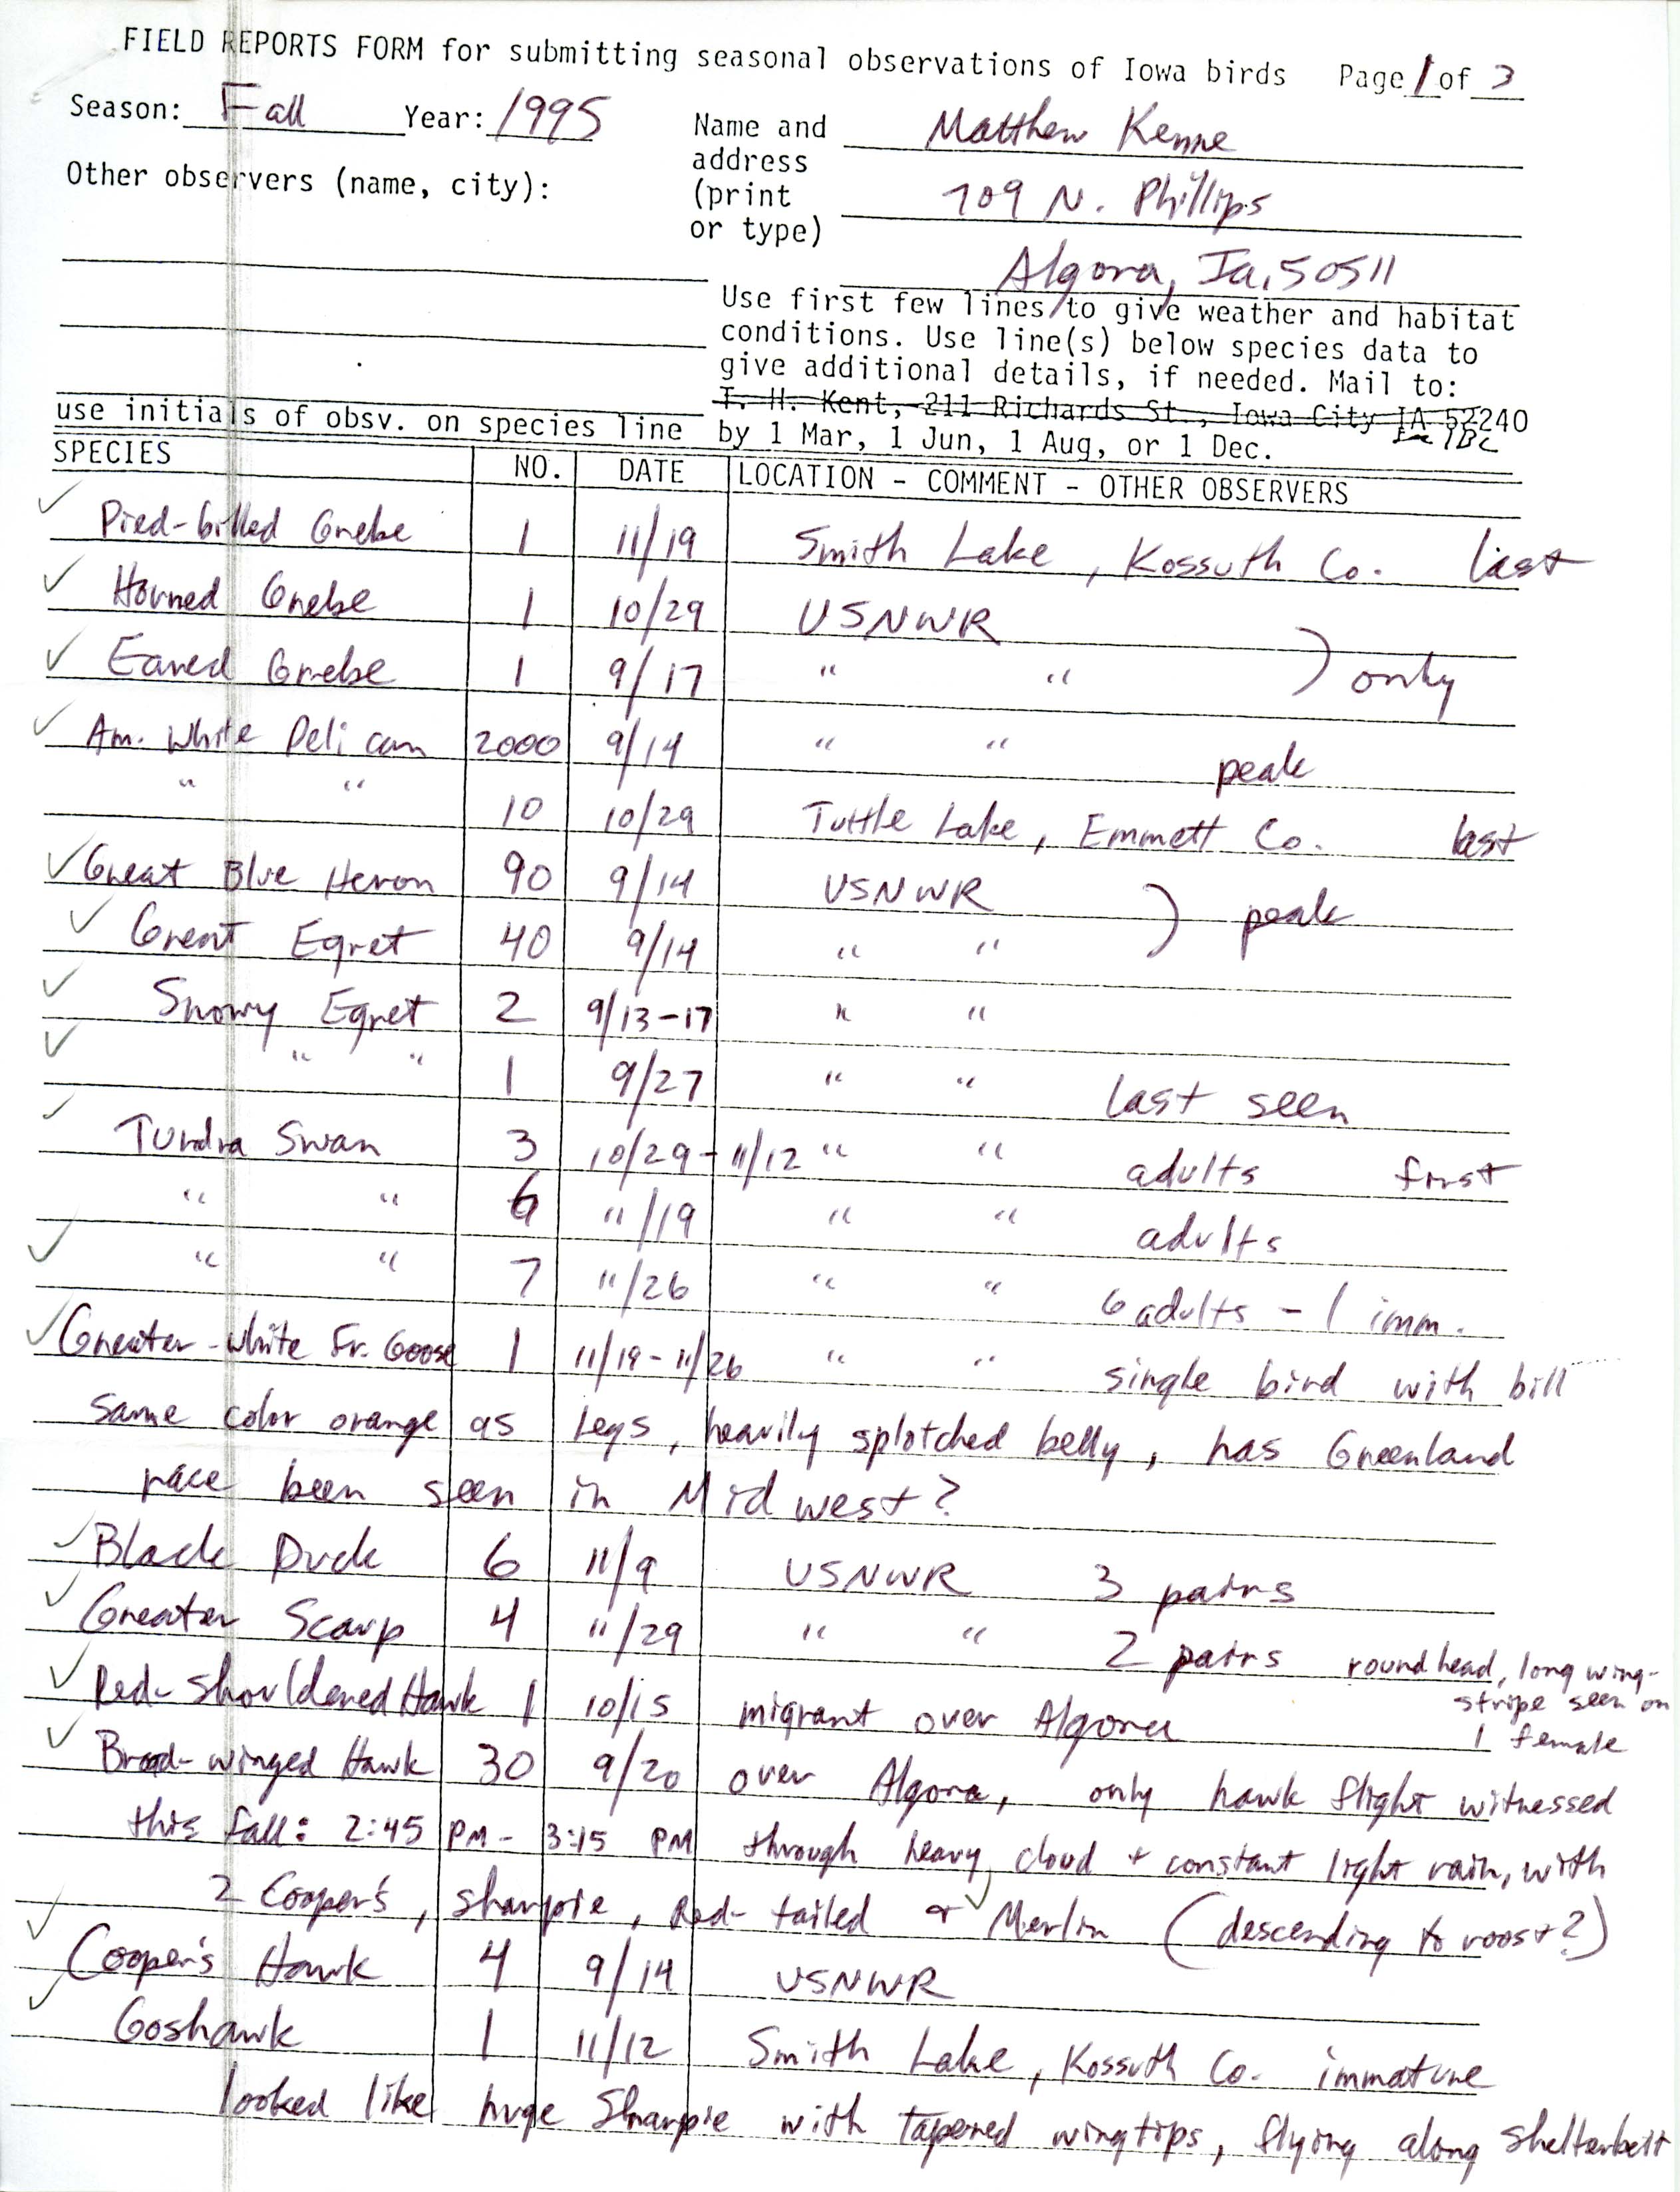 Field reports form for submitting seasonal observations of Iowa birds, Matthew Kenne, fall 1995